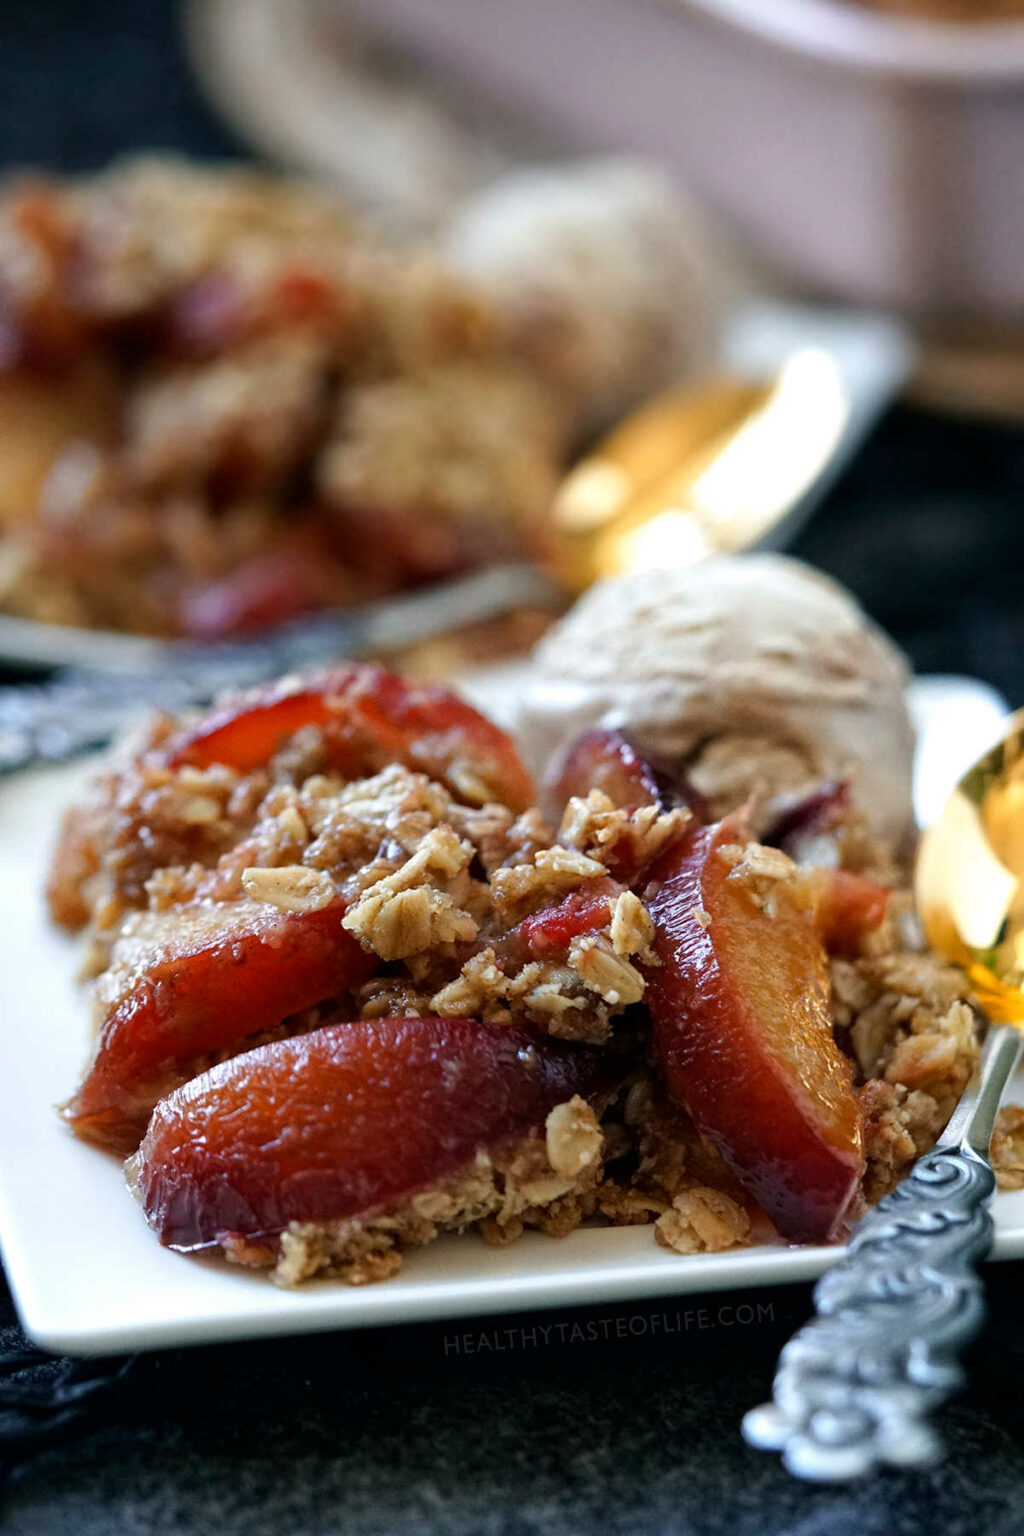 Plum And Apple Crumble: End of Summer Sweet Treat | Healthy Taste Of Life